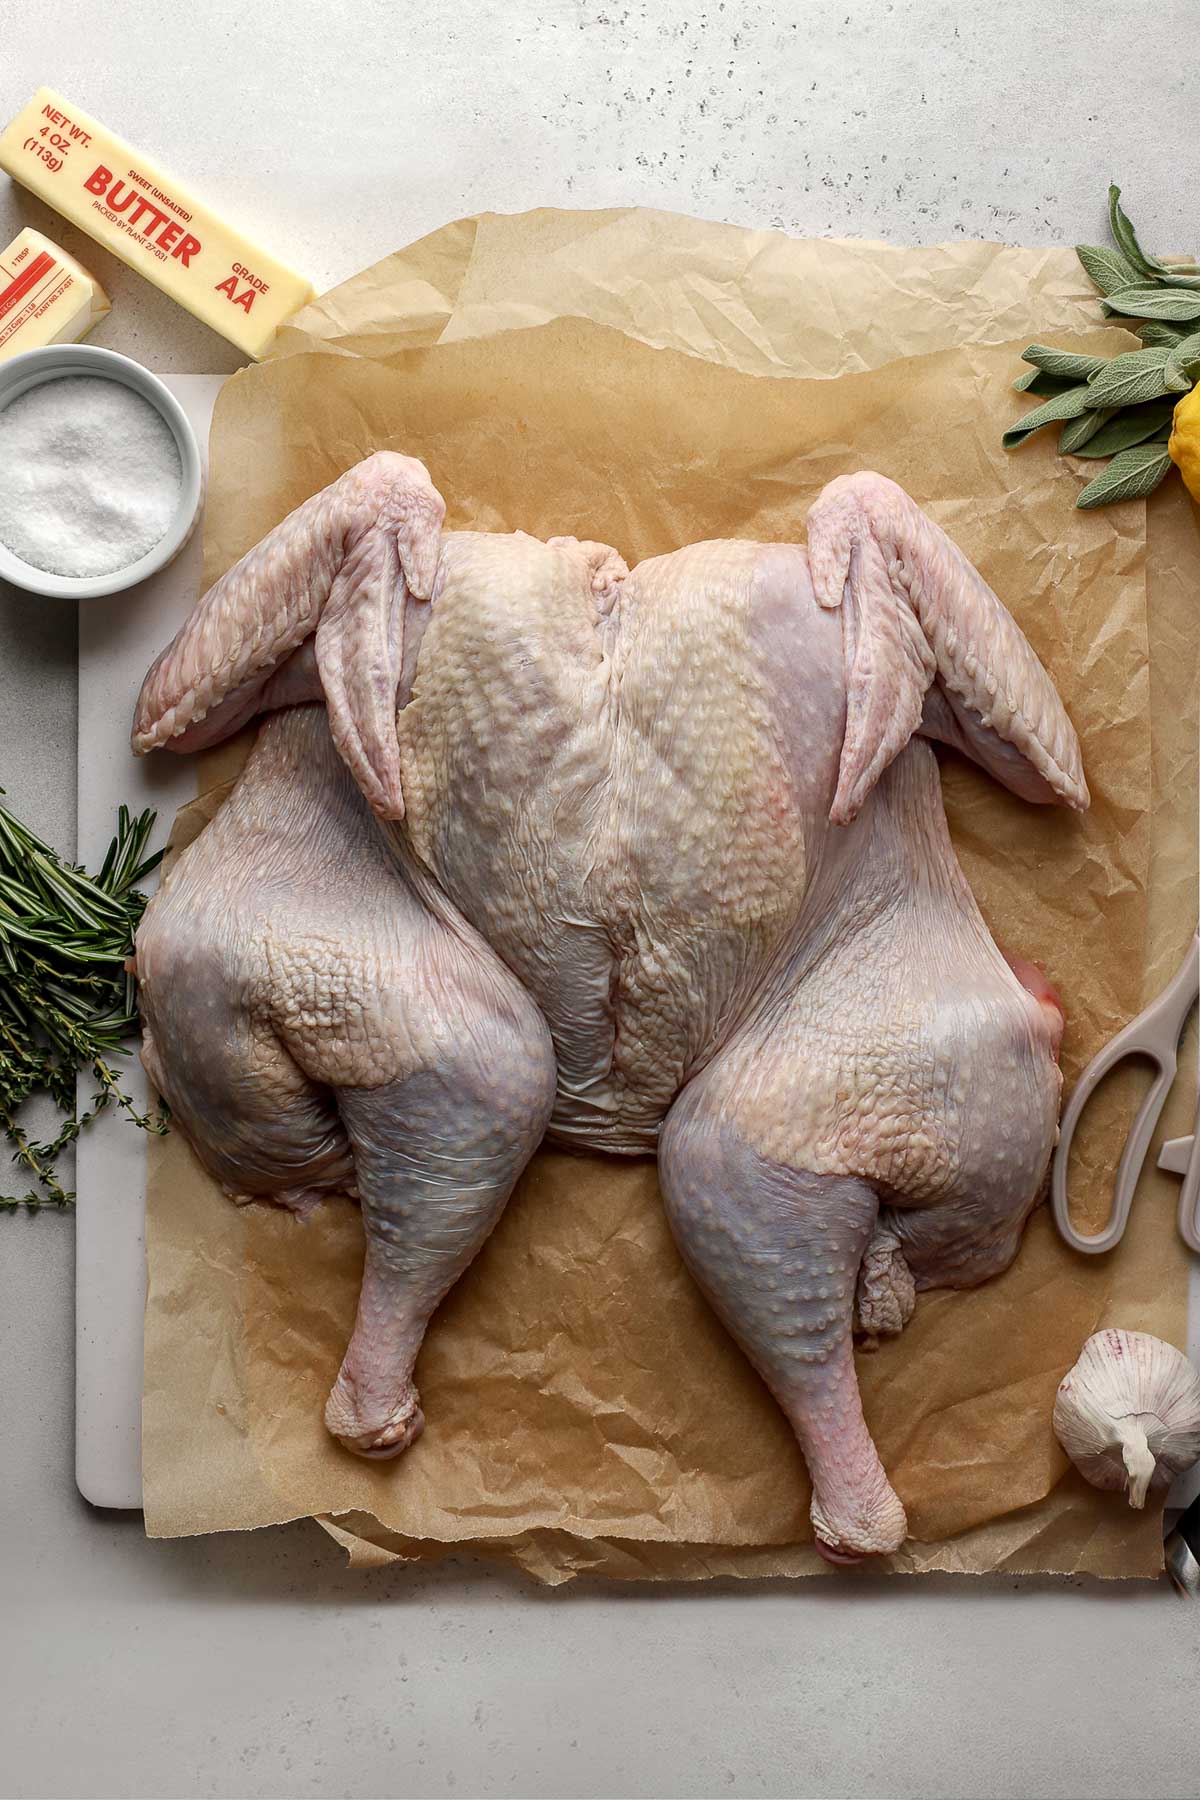 https://playswellwithbutter.com/wp-content/uploads/2021/10/How-to-Spatchcock-a-Turkey-14.jpg